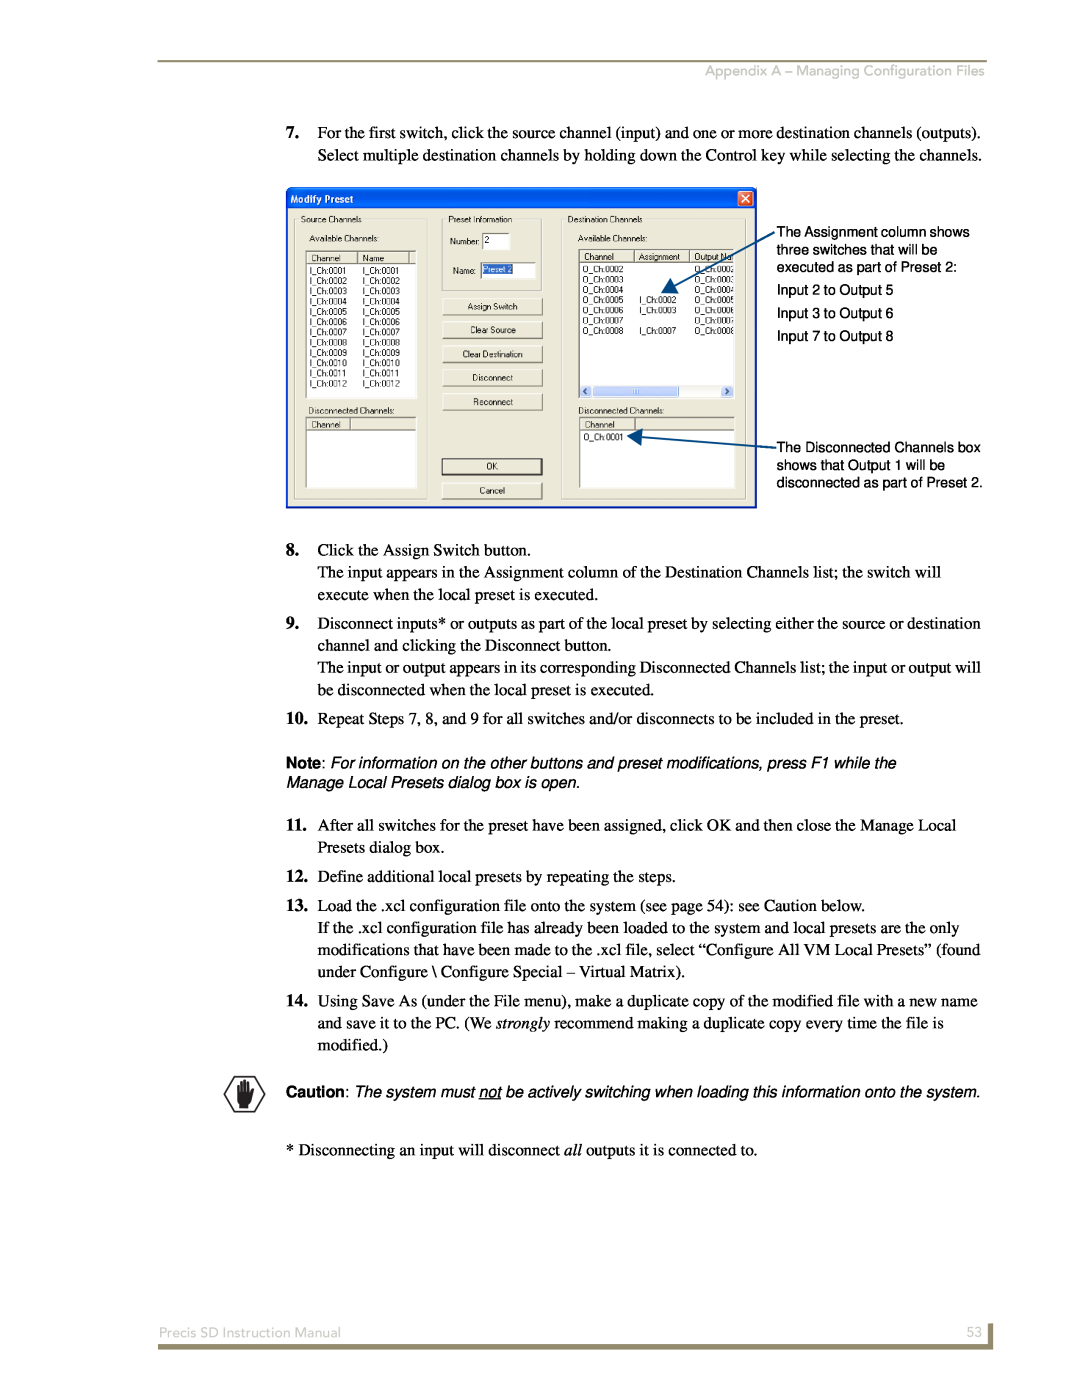 AMX Precis SD instruction manual Click the Assign Switch button 